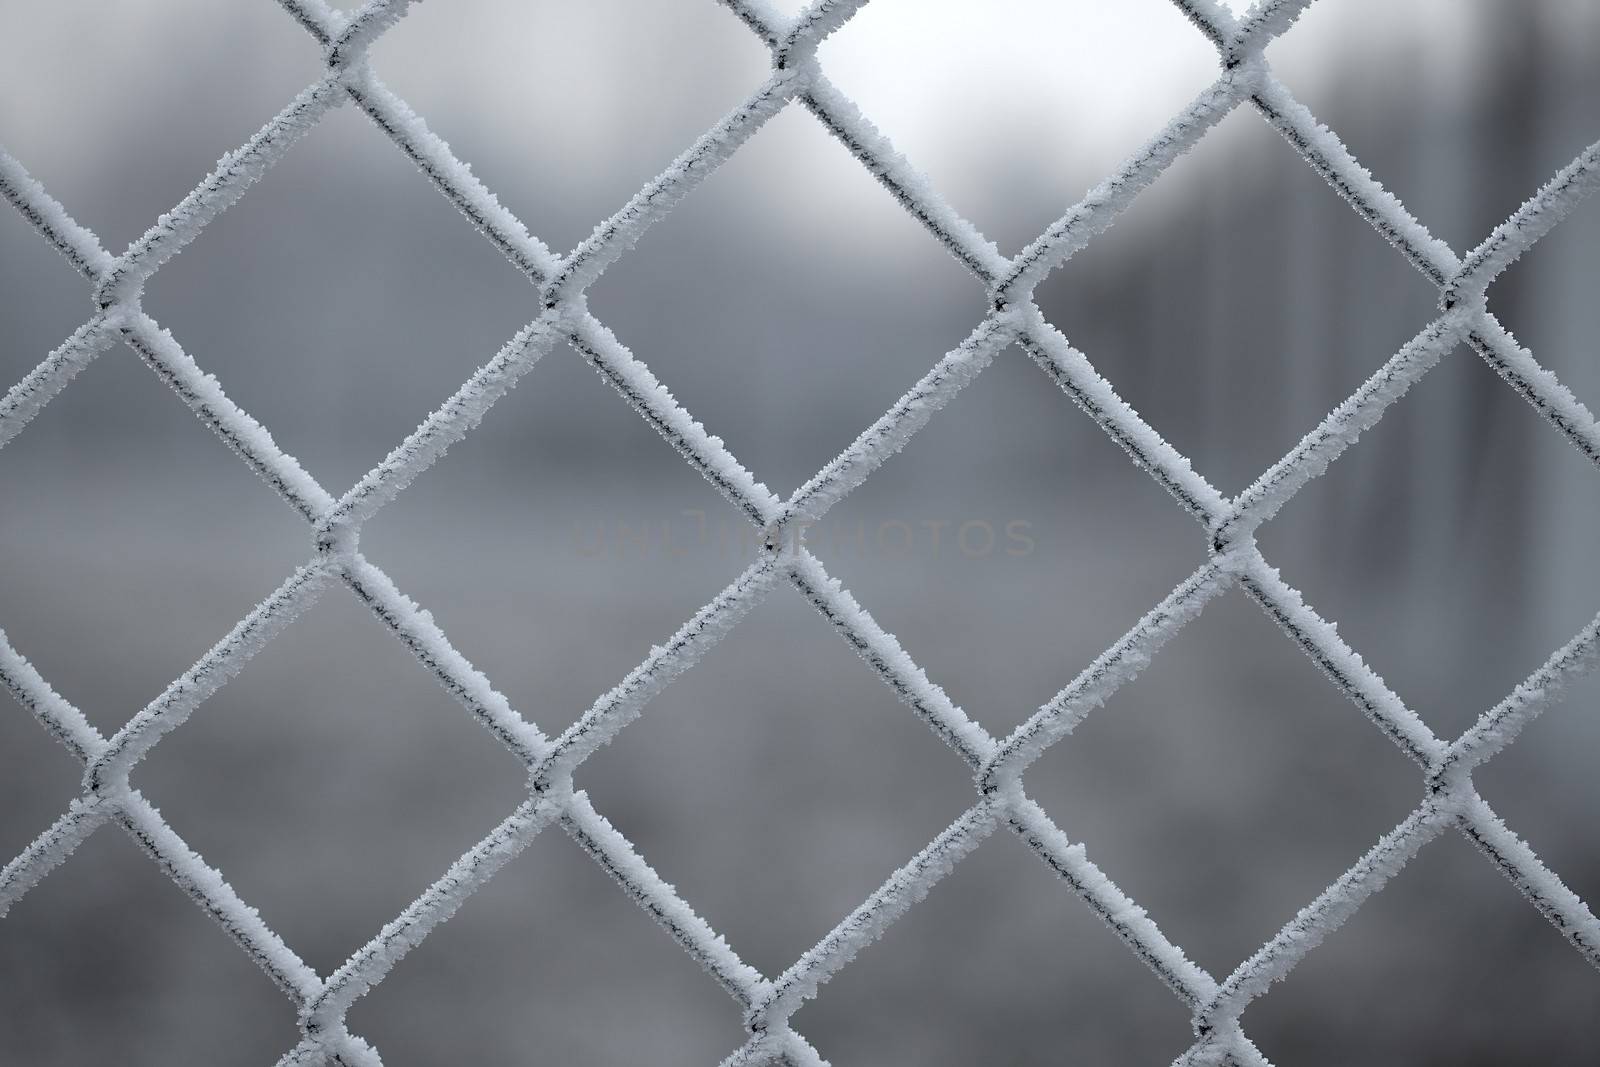 Icy wire mesh fence in winter